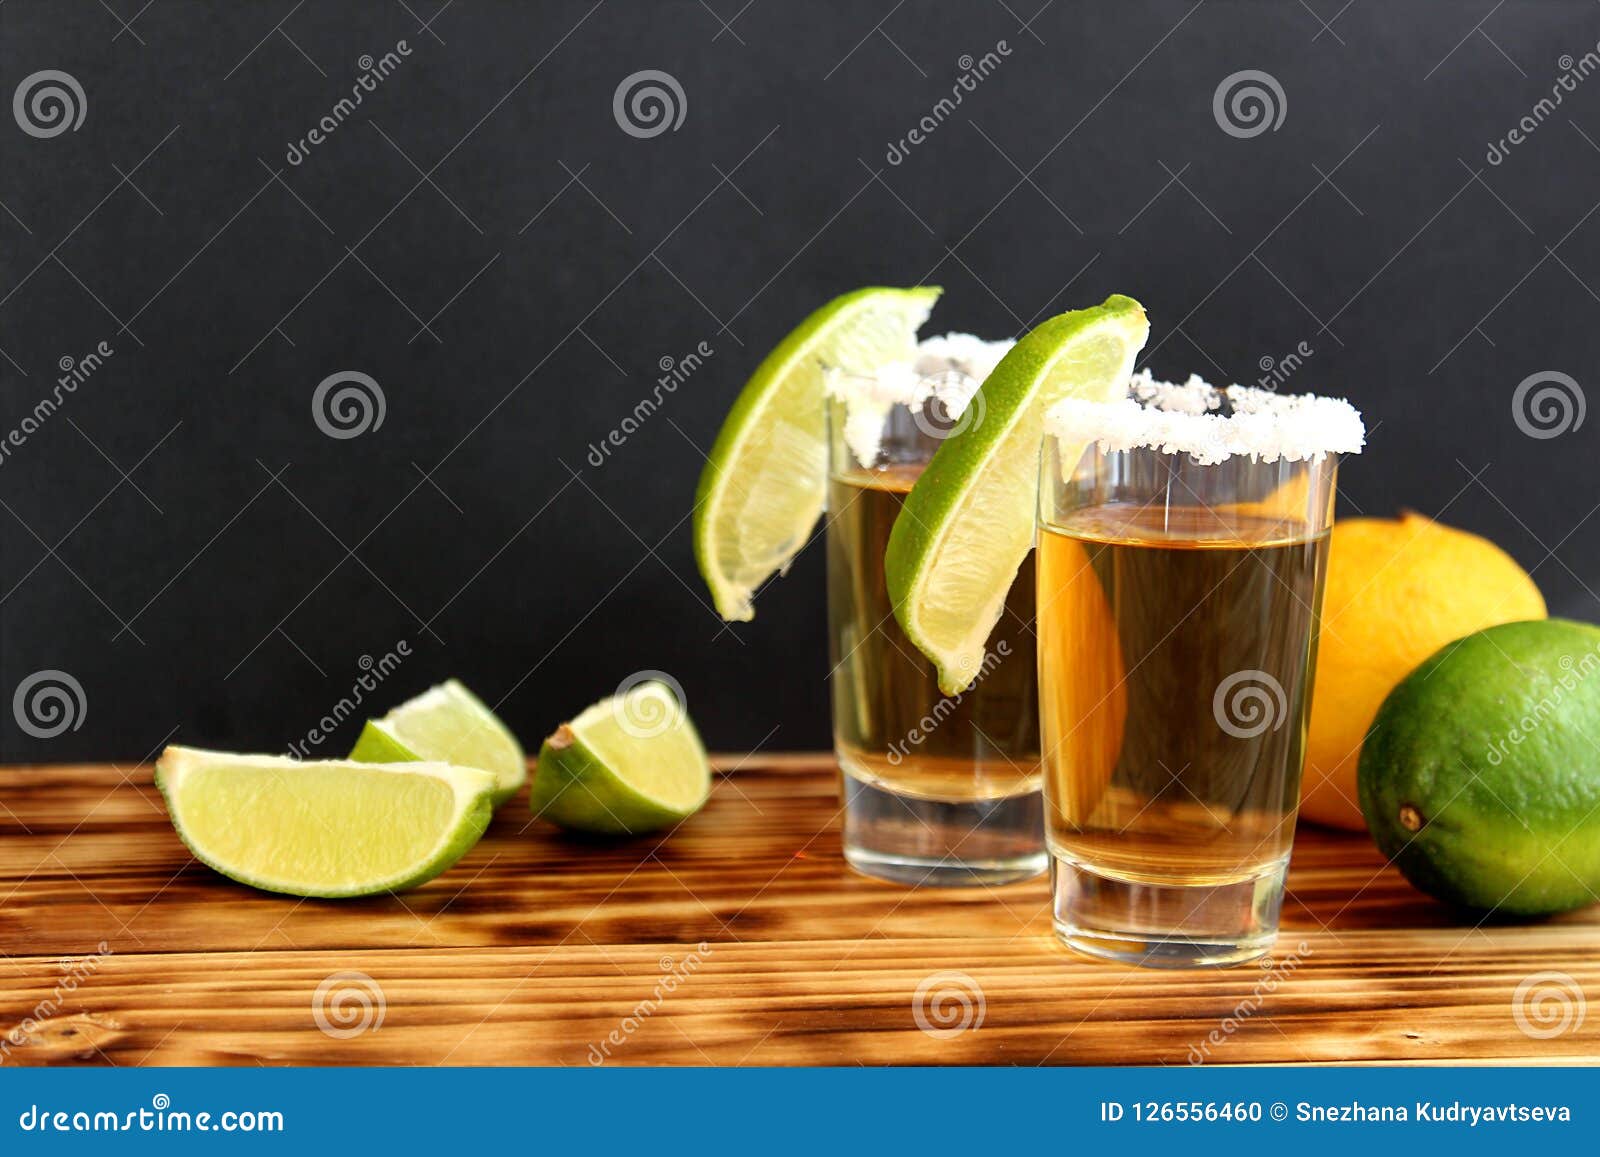 Two Glasses of Tequila with Lime and Salt Stock Photo - Image of liquid ...